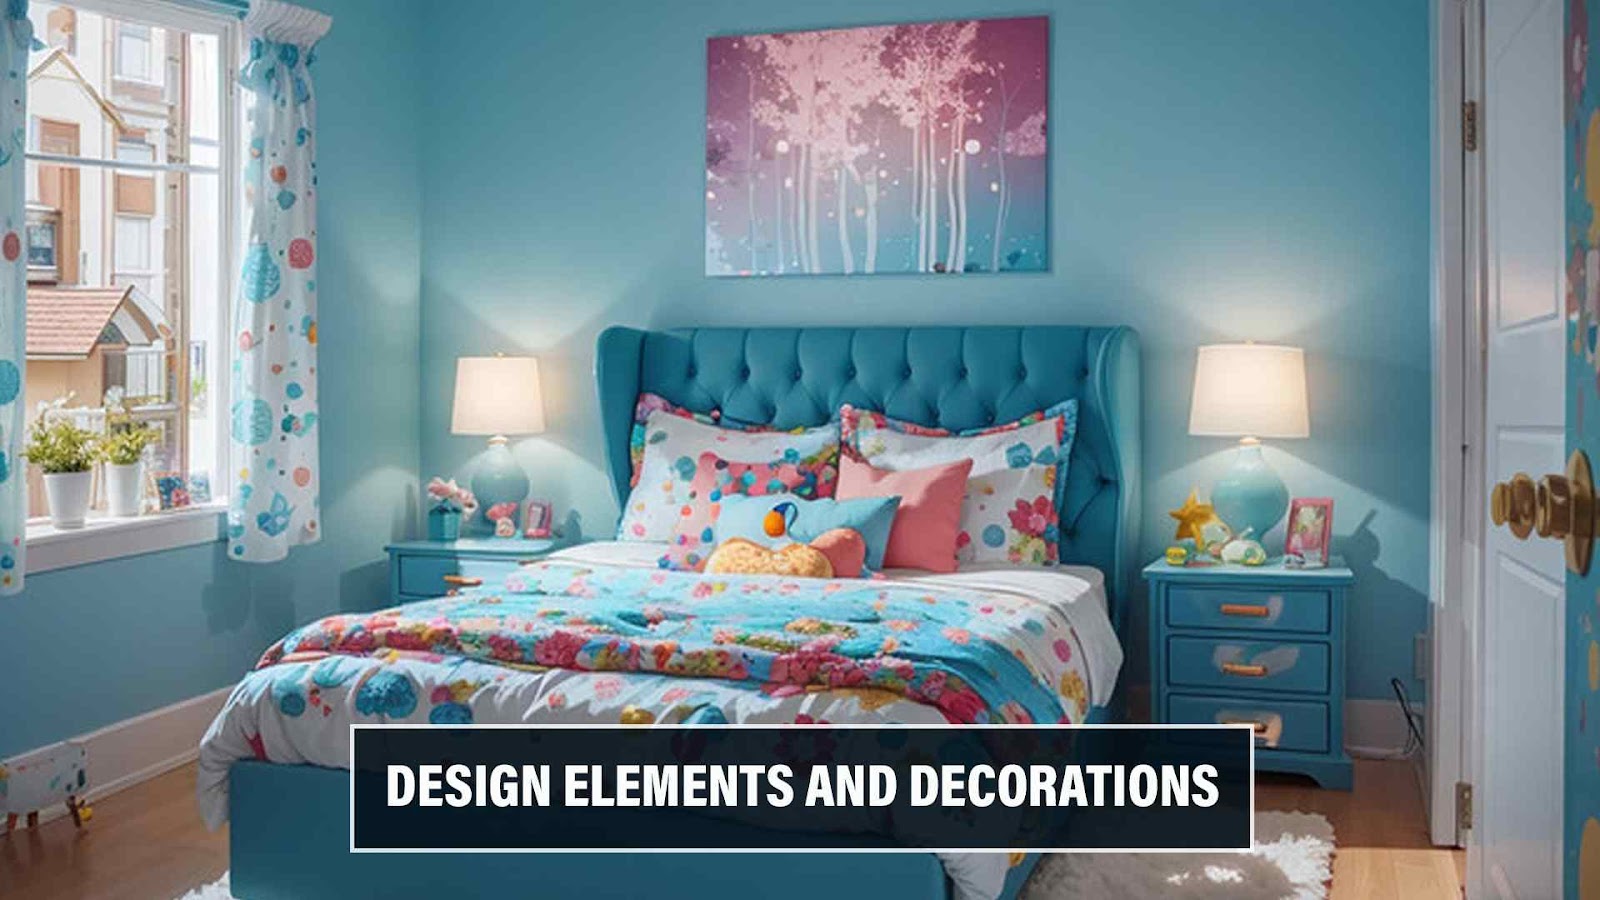 Design Elements and Decorations